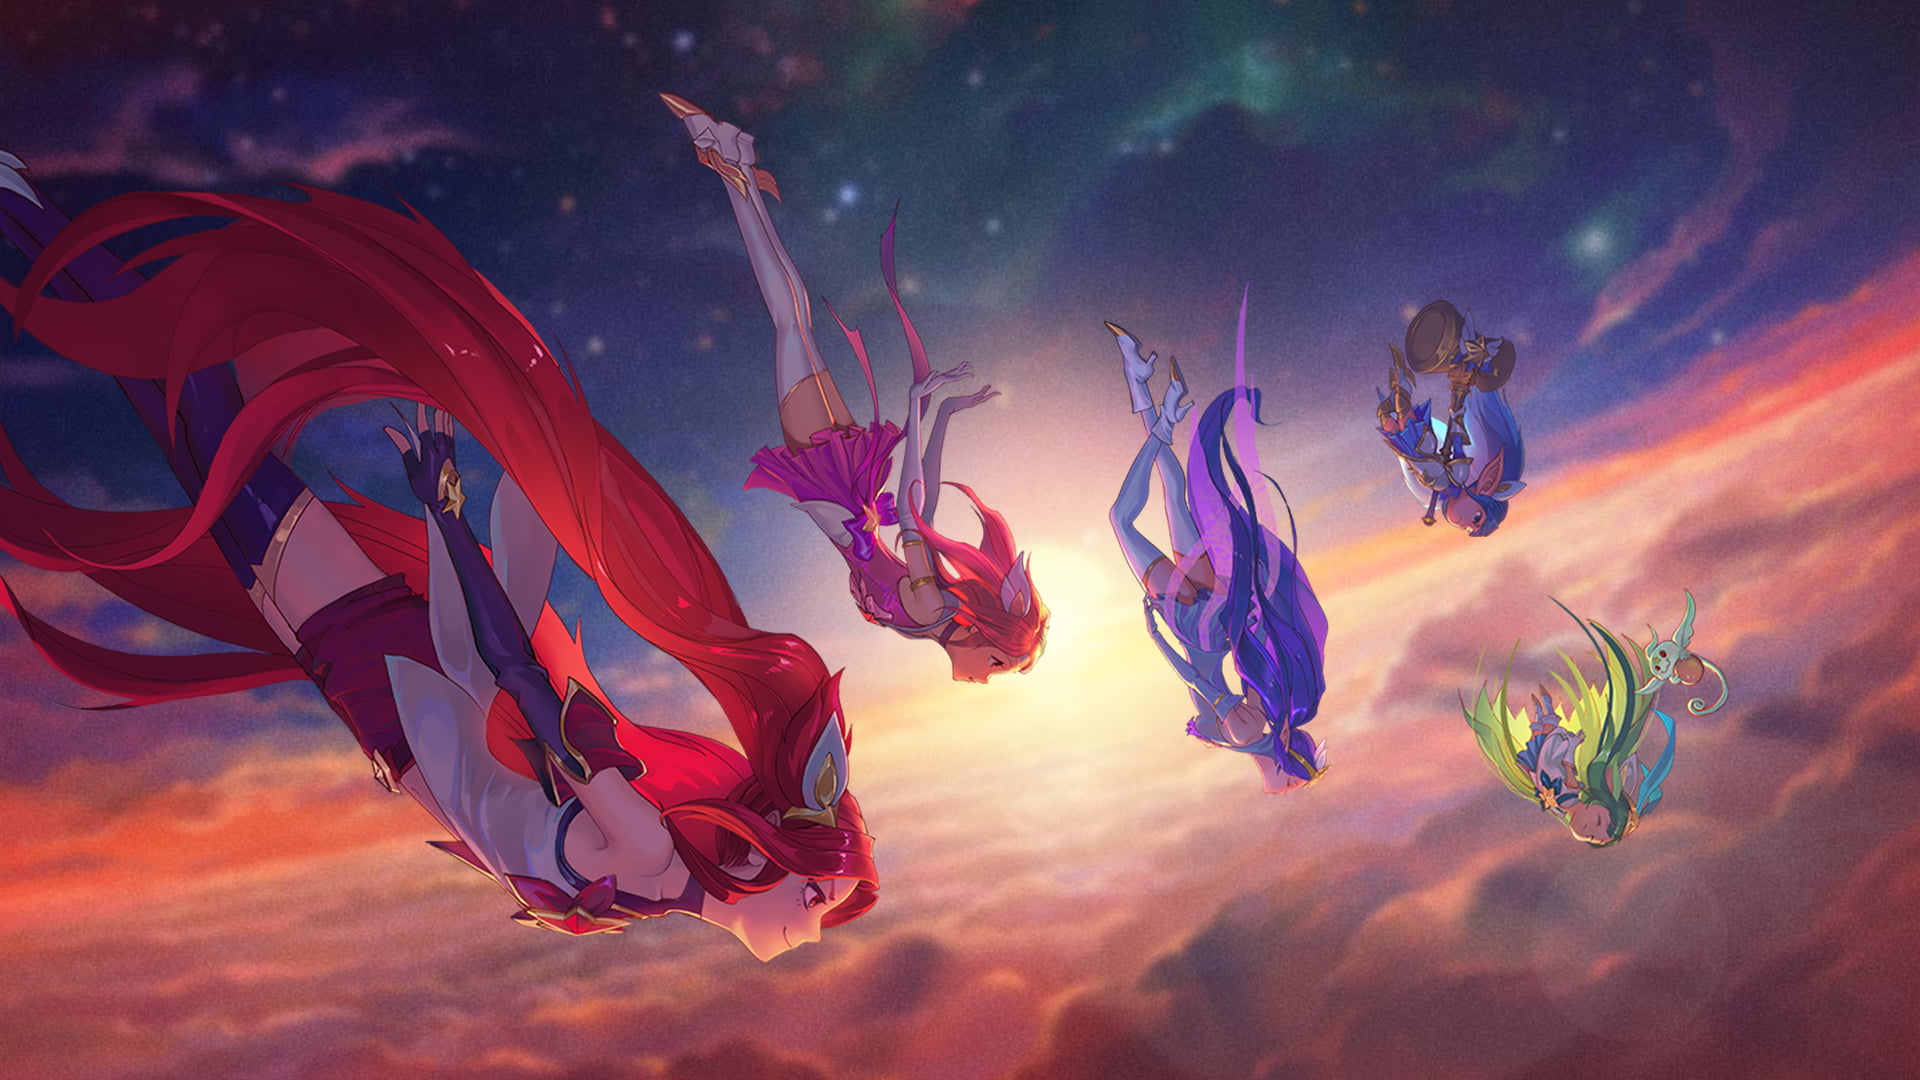 Falling From The Sky  Anime Lovers Wallpapers and Images  Desktop  Nexus Groups